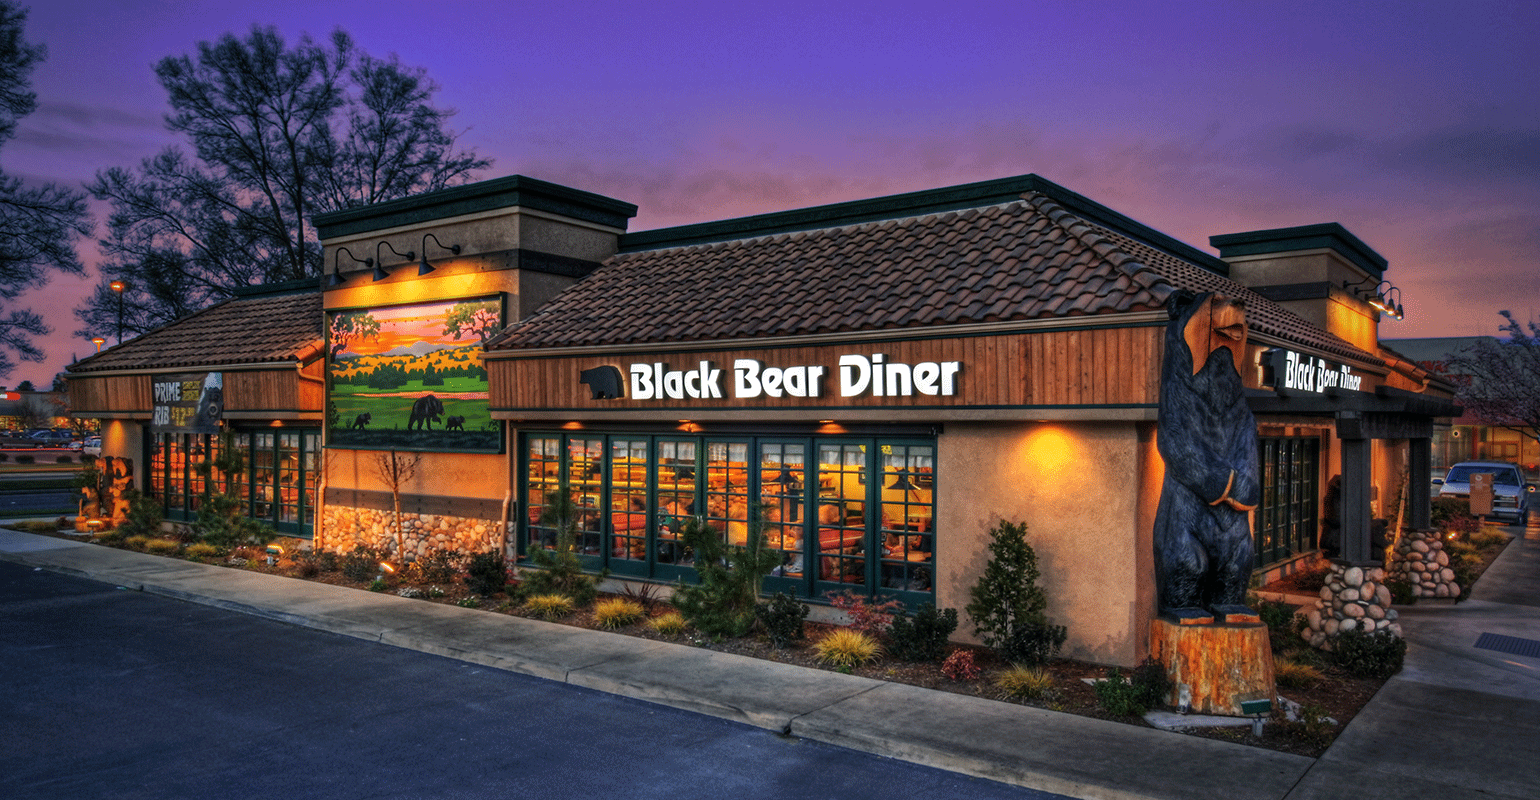 Black Bear Diner CEO talks expansion as chain preps new opening